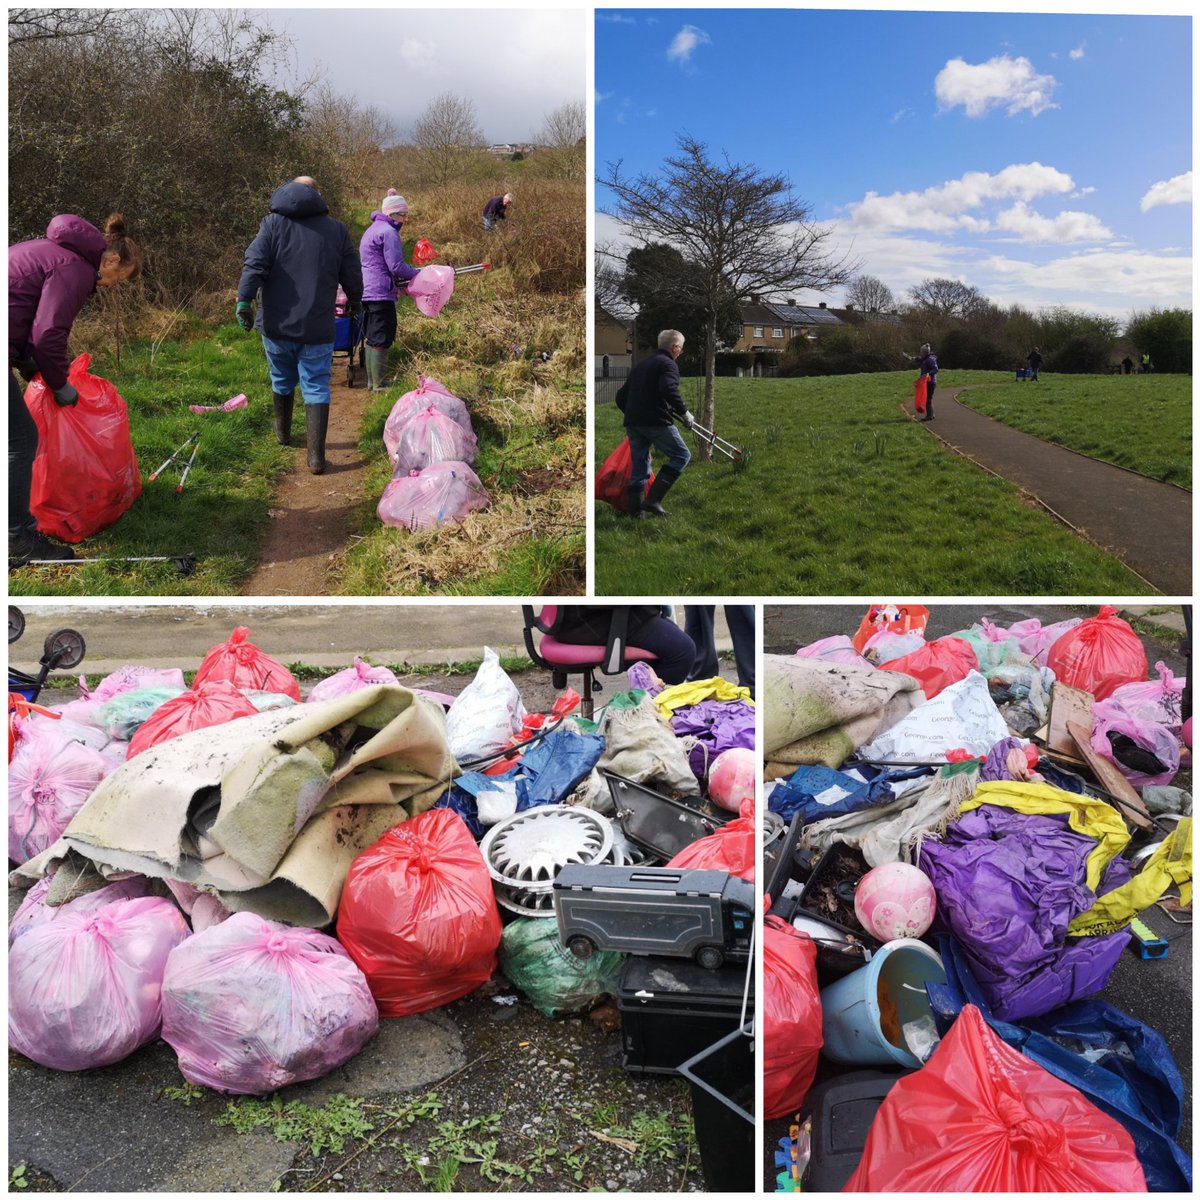 Our #SpringCleanCymru event had 11 incredible volunteers removing 84 bags of litter! A massive haul of rubbish that is no longer polluting our environment. What a difference we have made. Thank you superstars for your commitment to clean up our community 🚮 #GBSpringClean